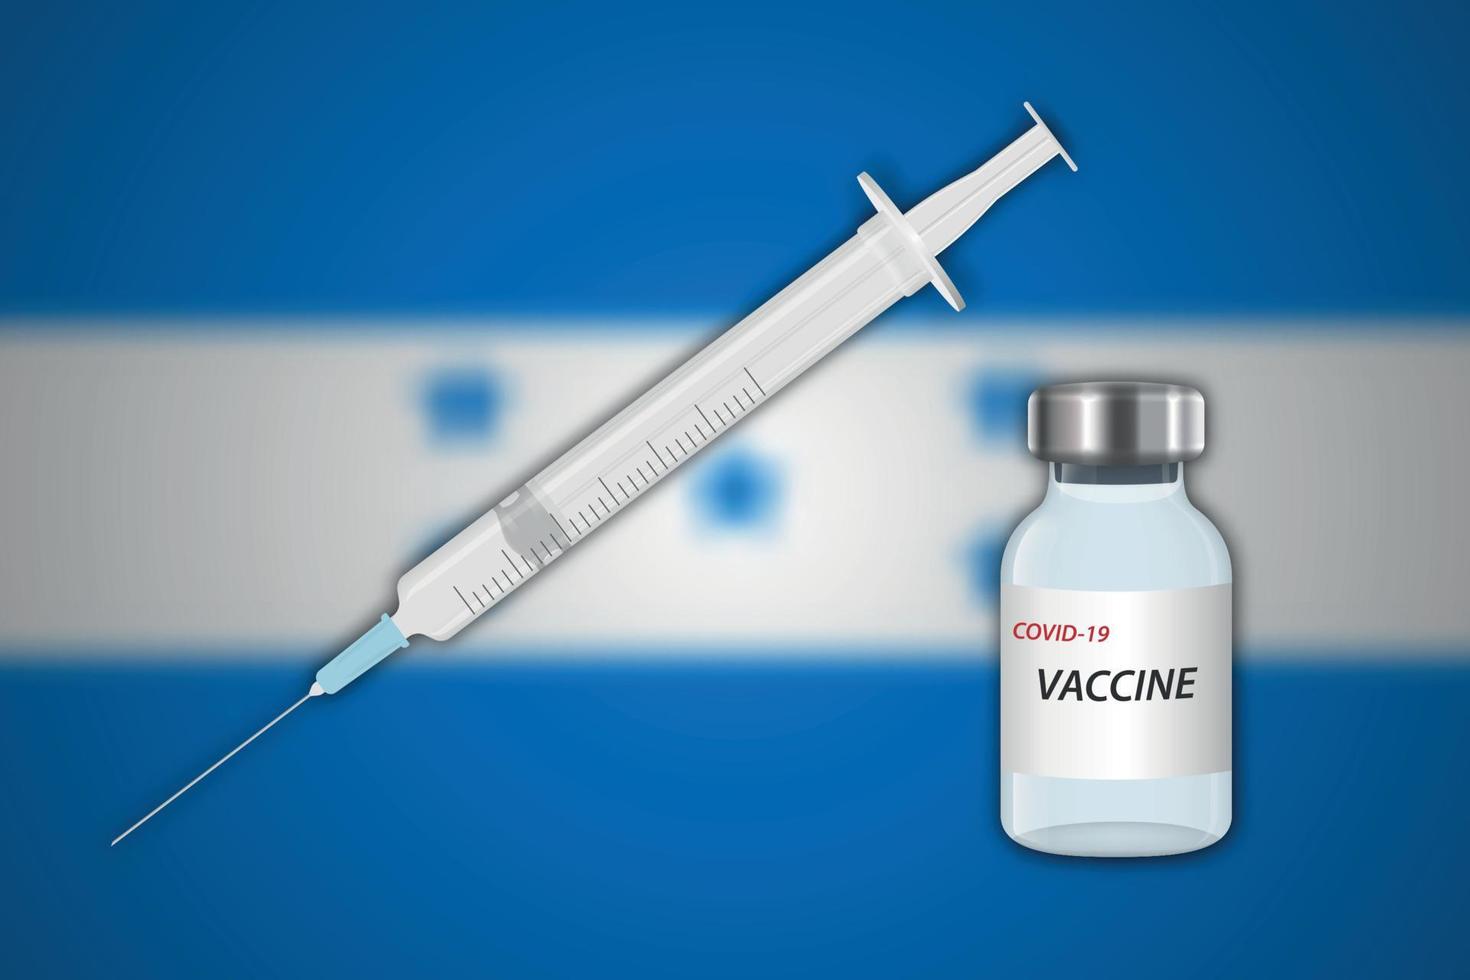 Syringe and vaccine vial on blur background with Honduras flag vector